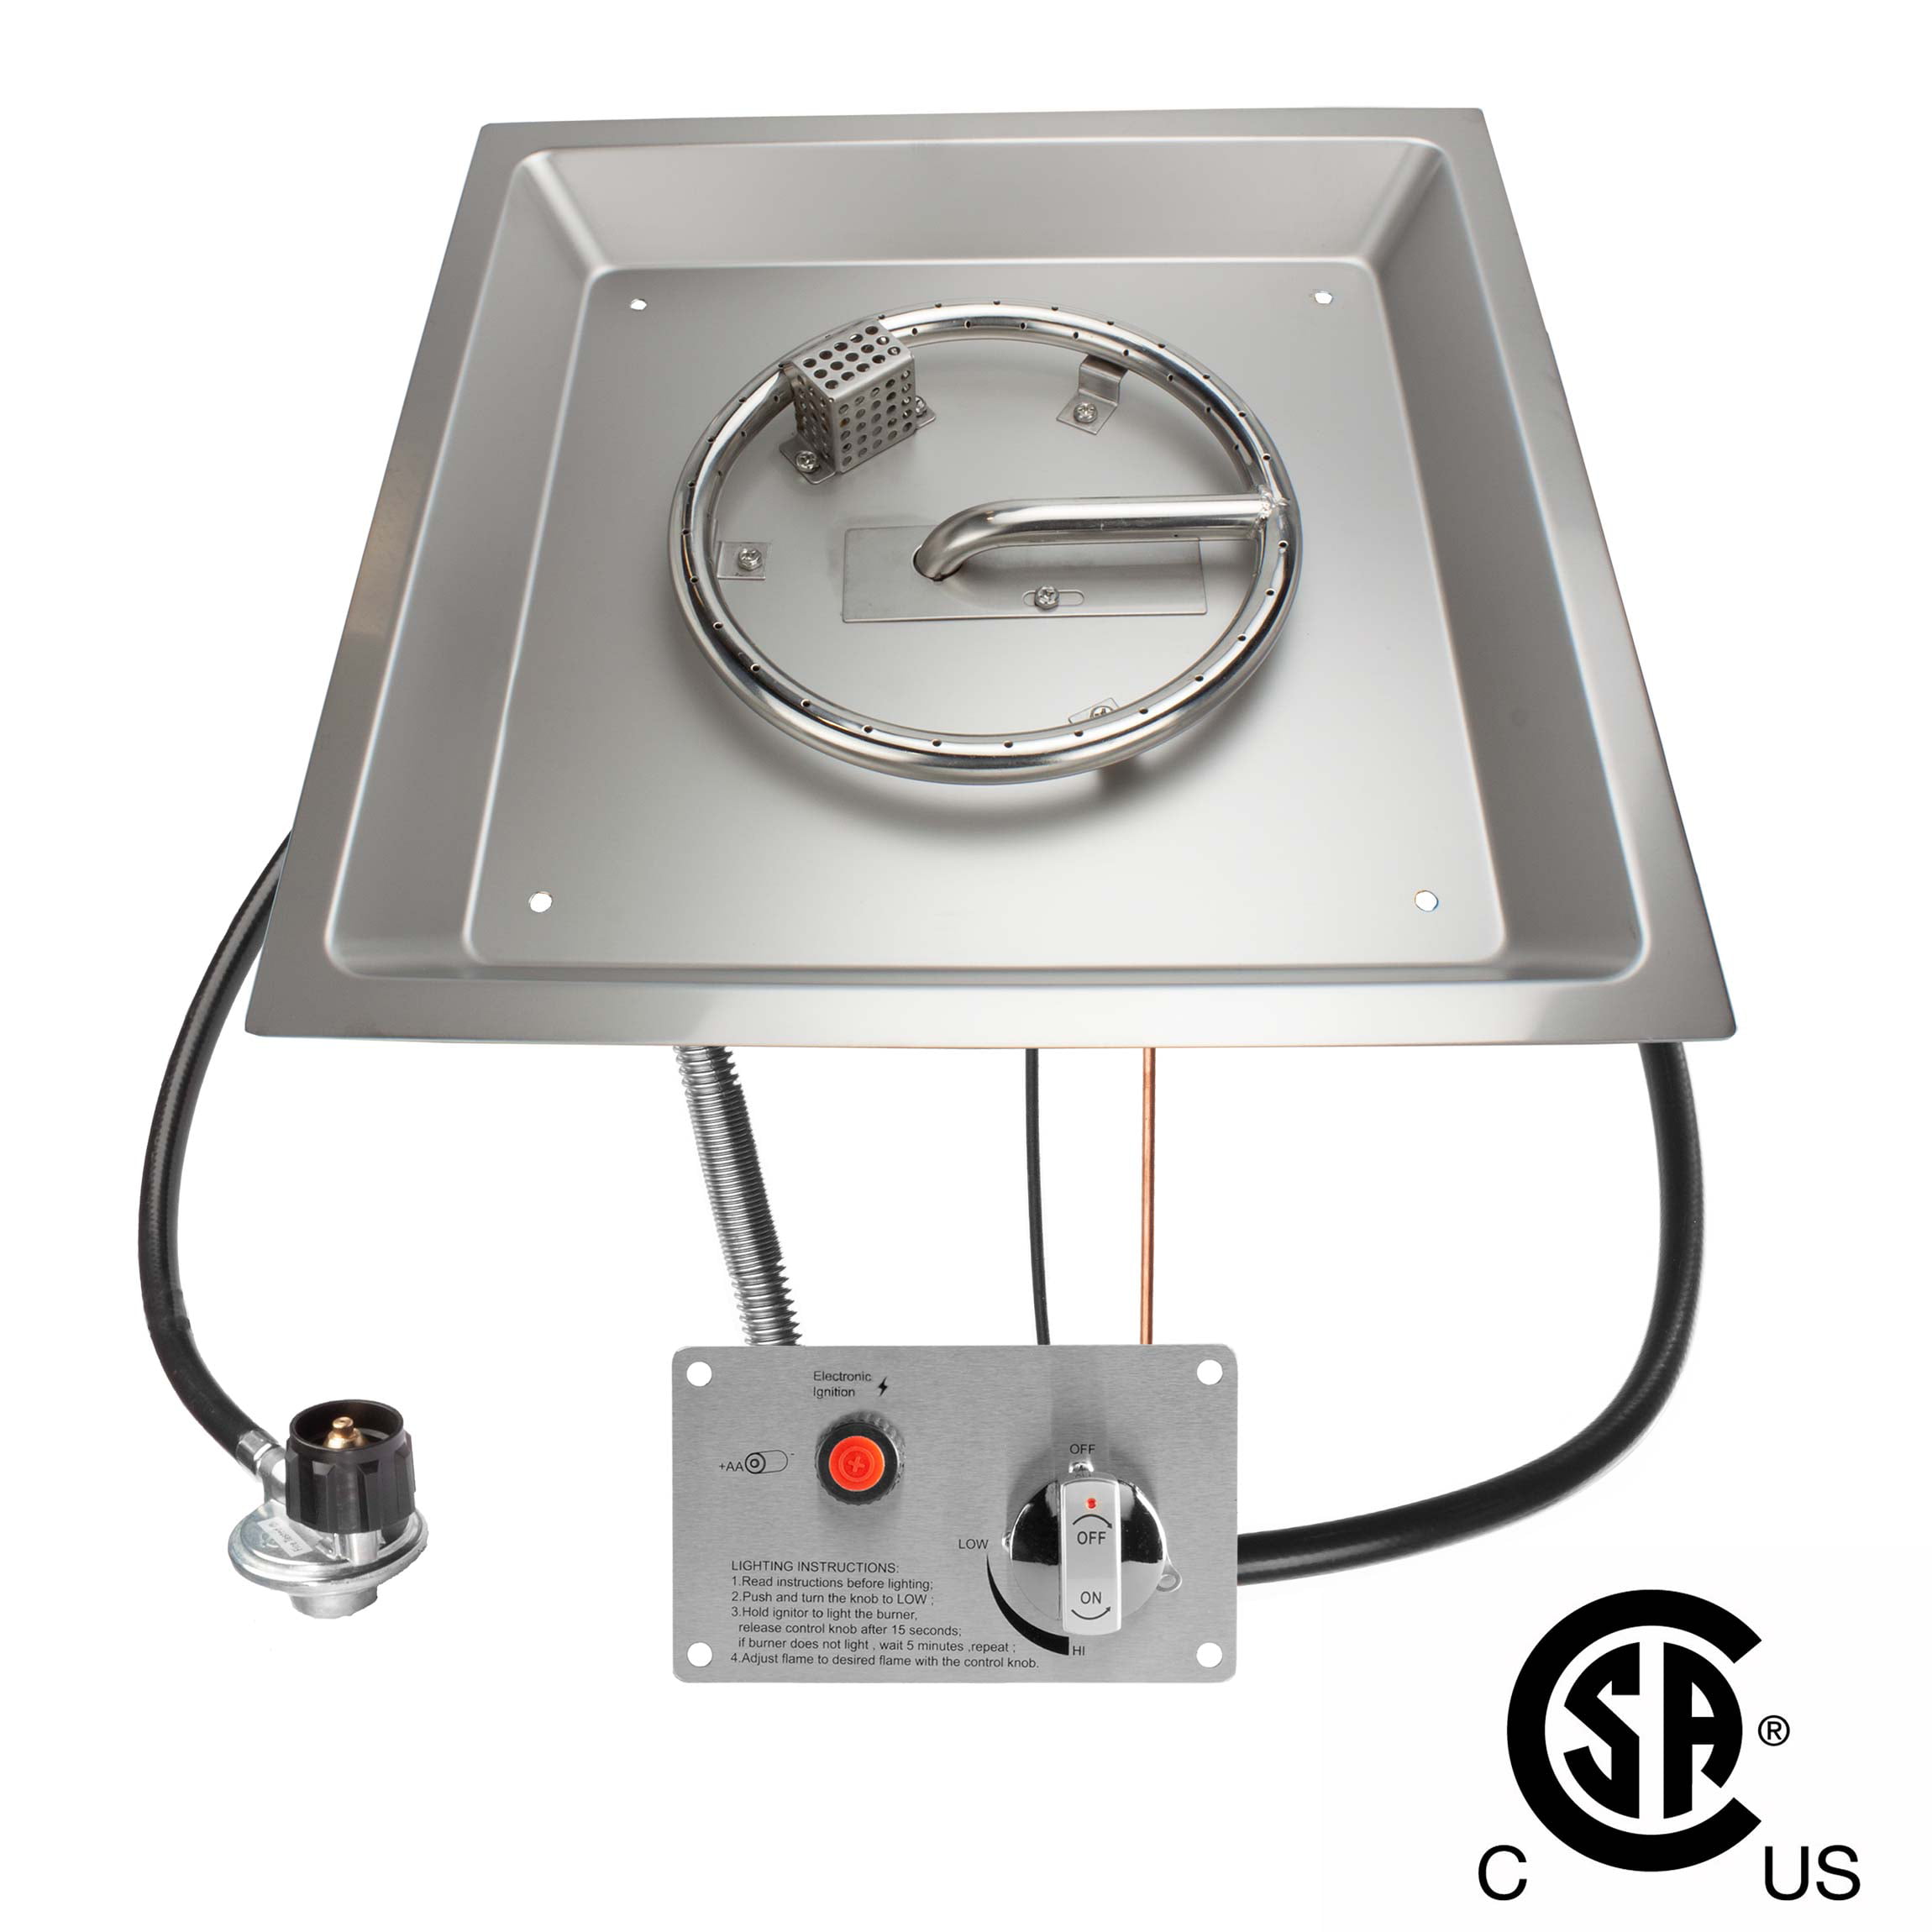 Stainless Steel Electronic Ignition Propane 36 x 6 CSA Certified Fire Pit Burner Kit 